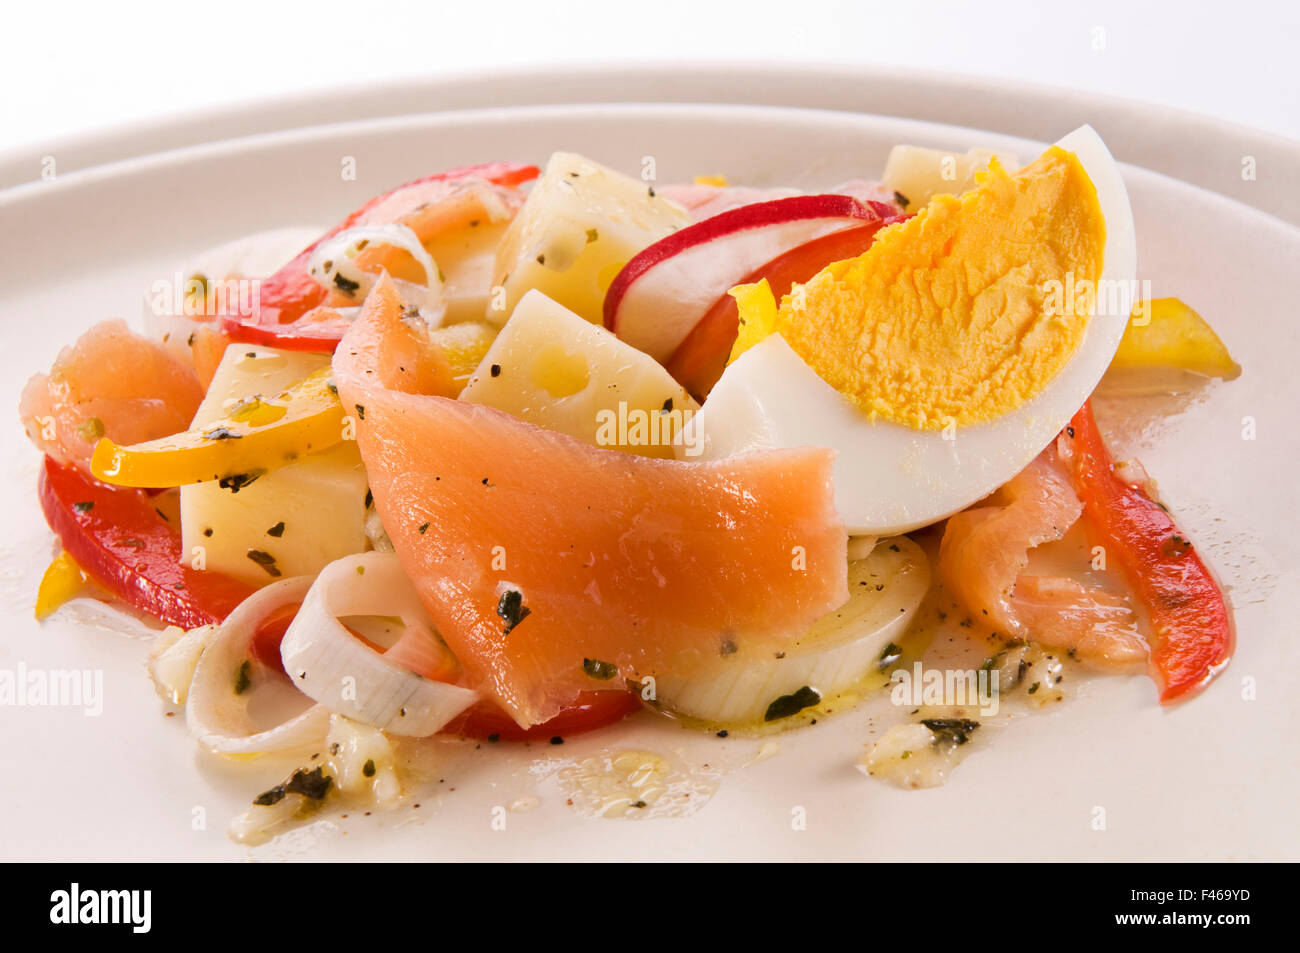 Appetizer of fresh salmon with cheese and vegetables close up. Stock Photo